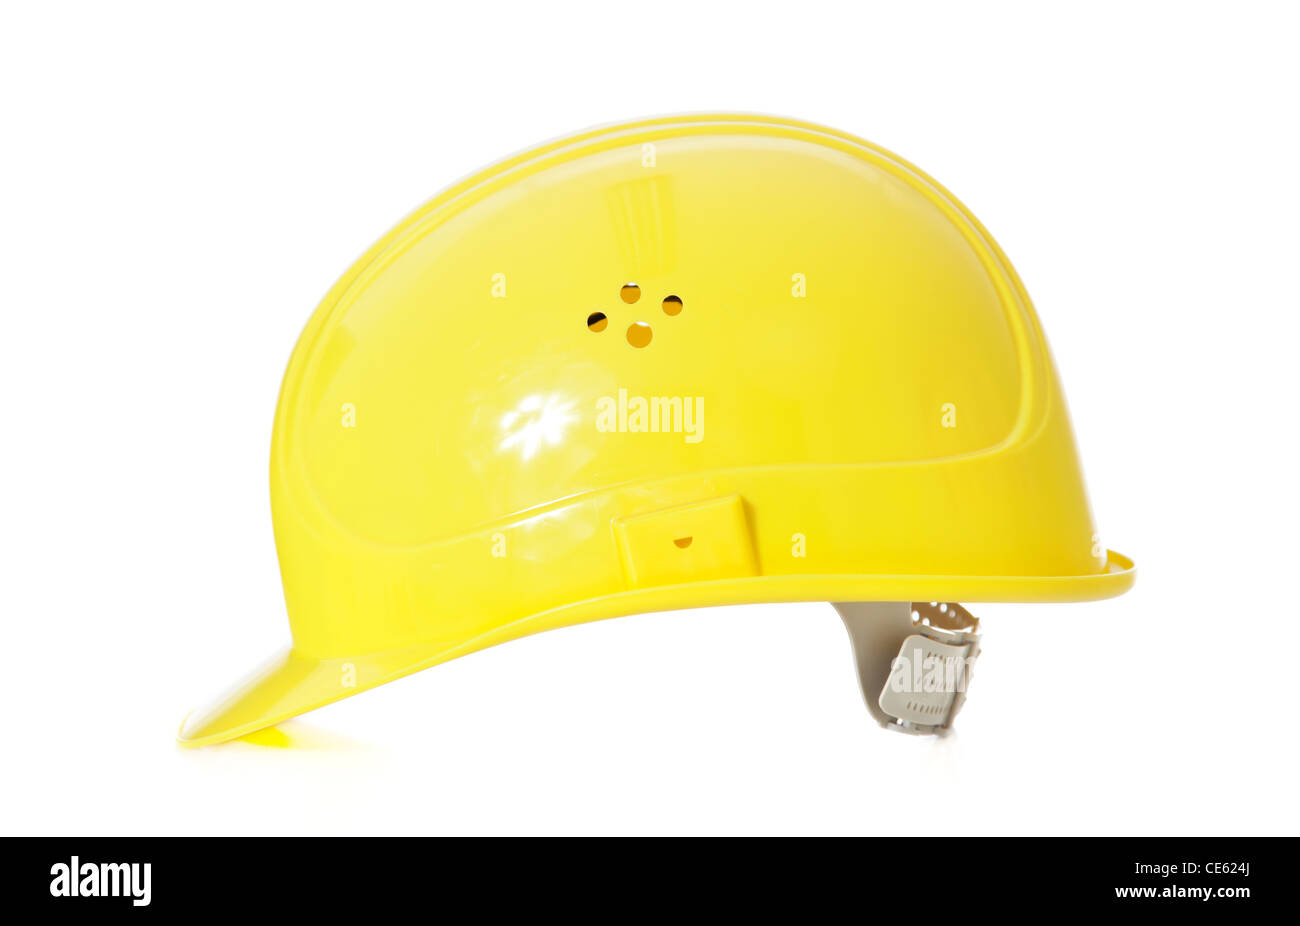 Standard yellow hard hat. All on white background. Stock Photo